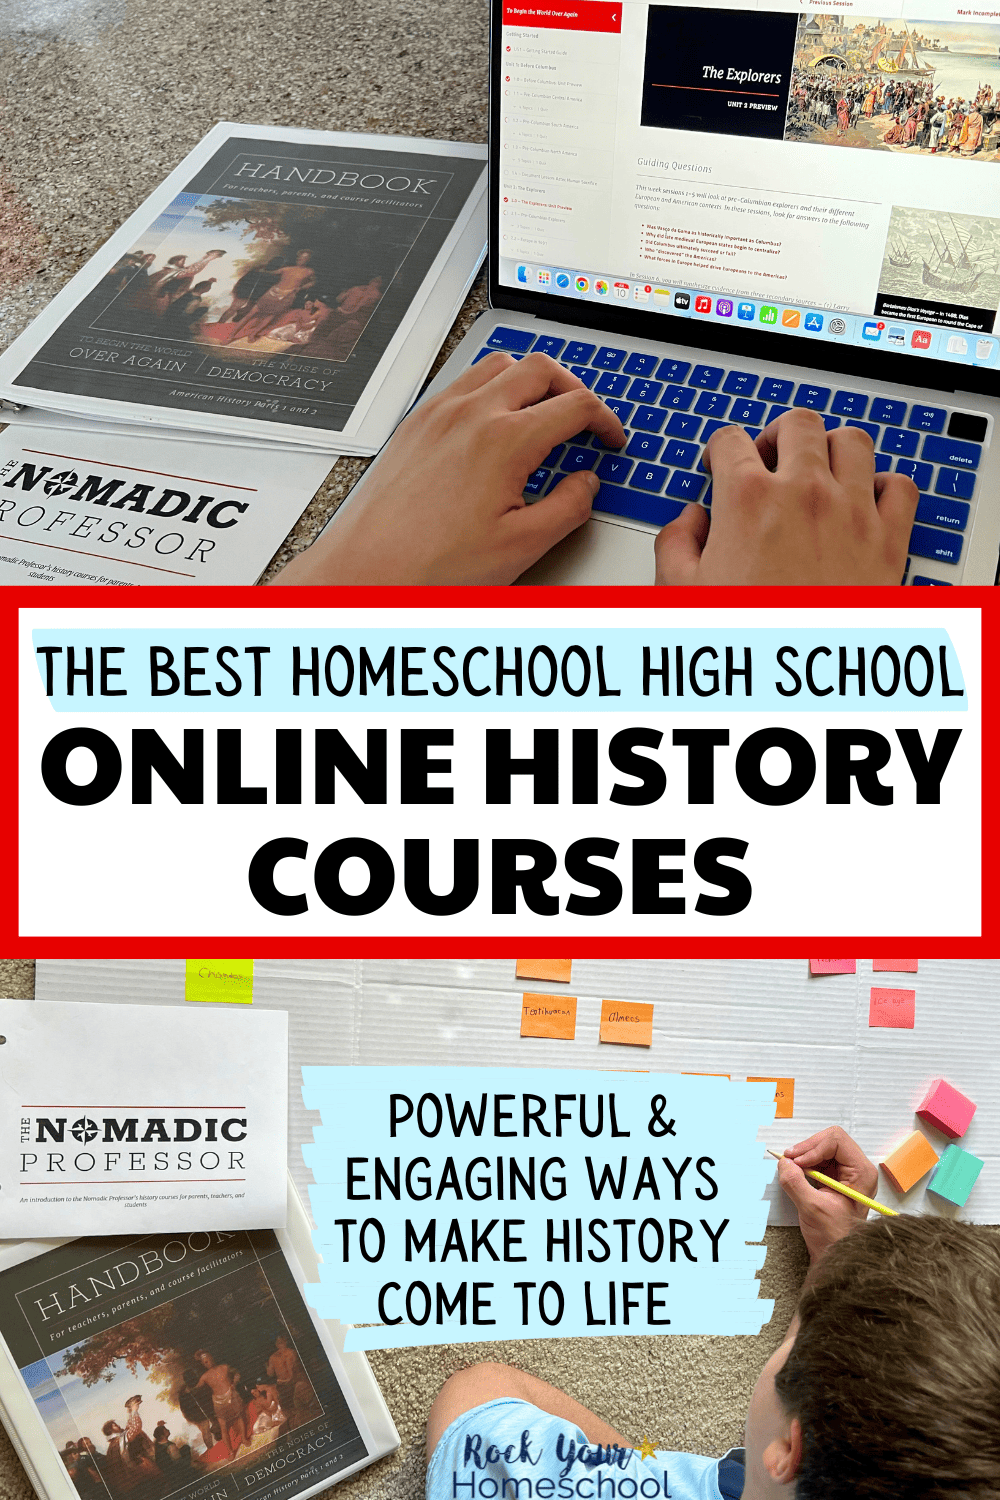 Homeschool History Online Courses: Why This High School Curriculum is the Best